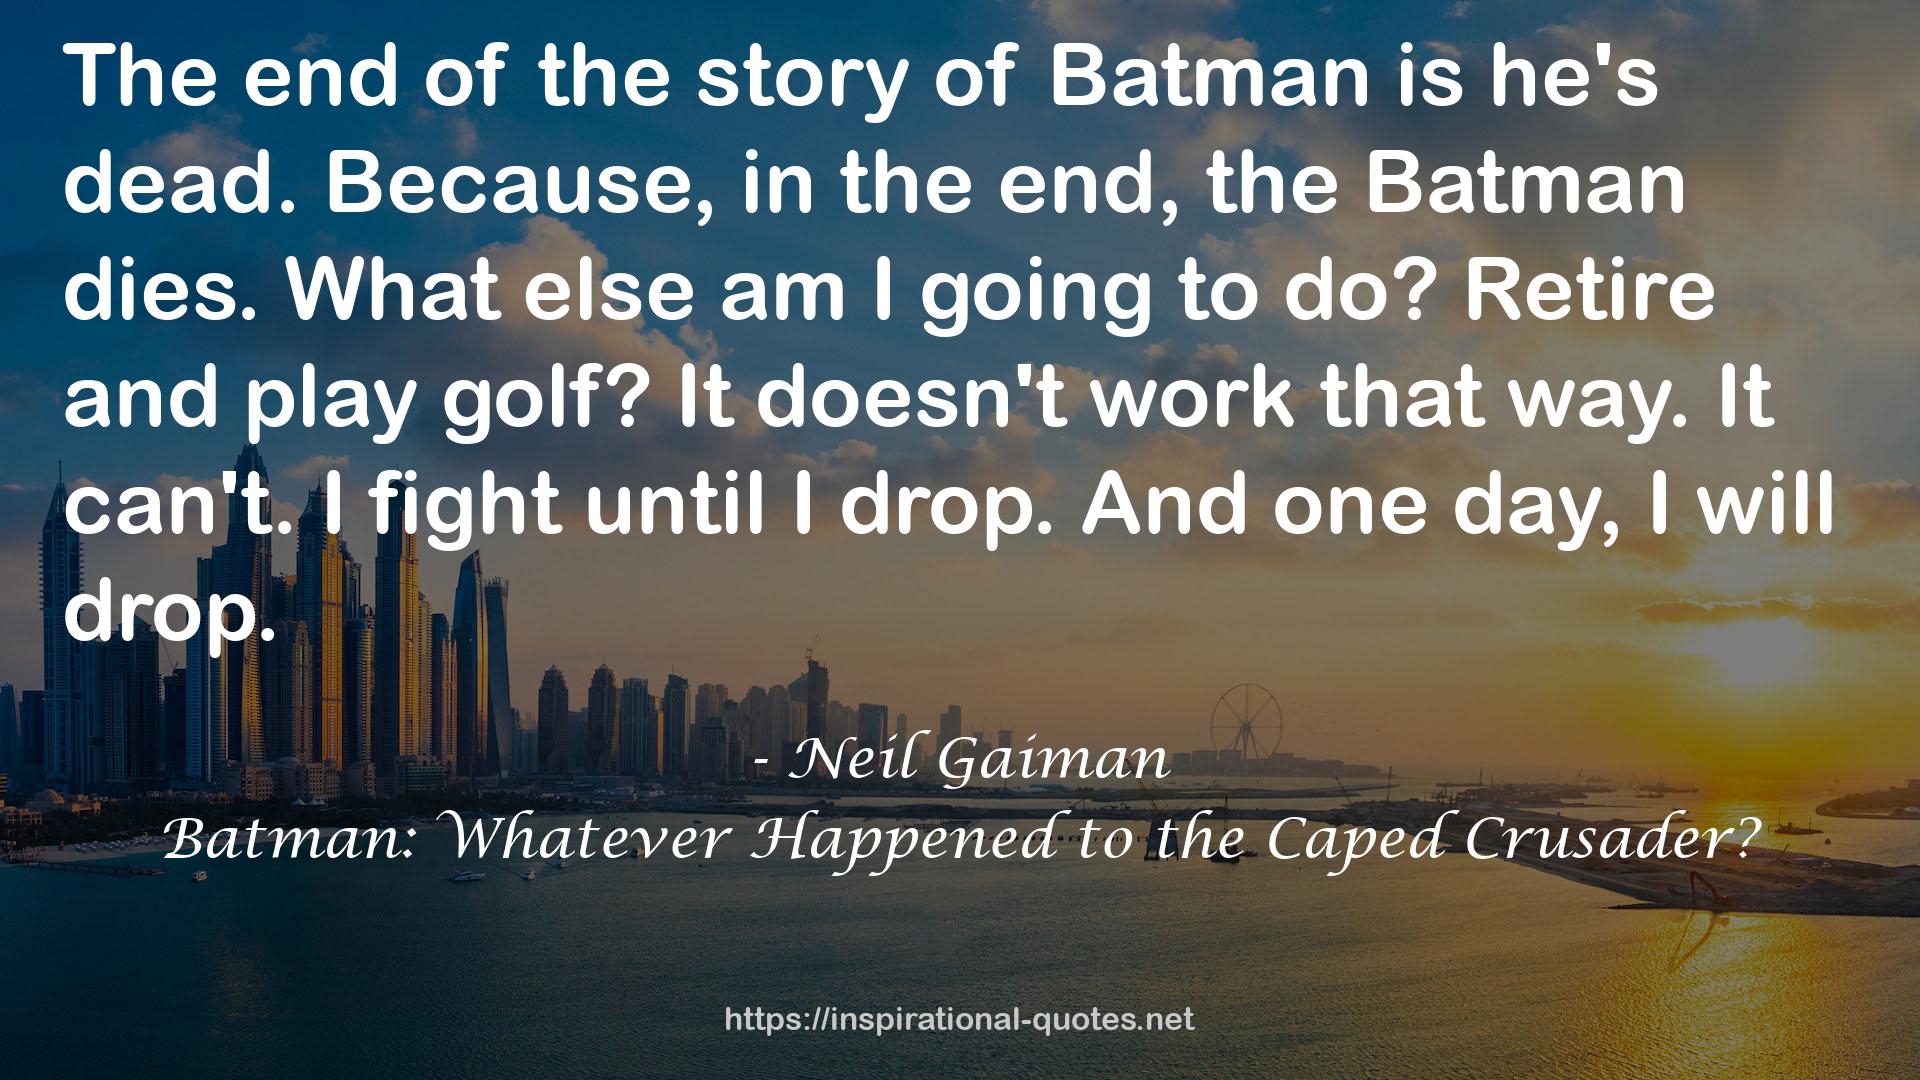 Batman: Whatever Happened to the Caped Crusader? QUOTES